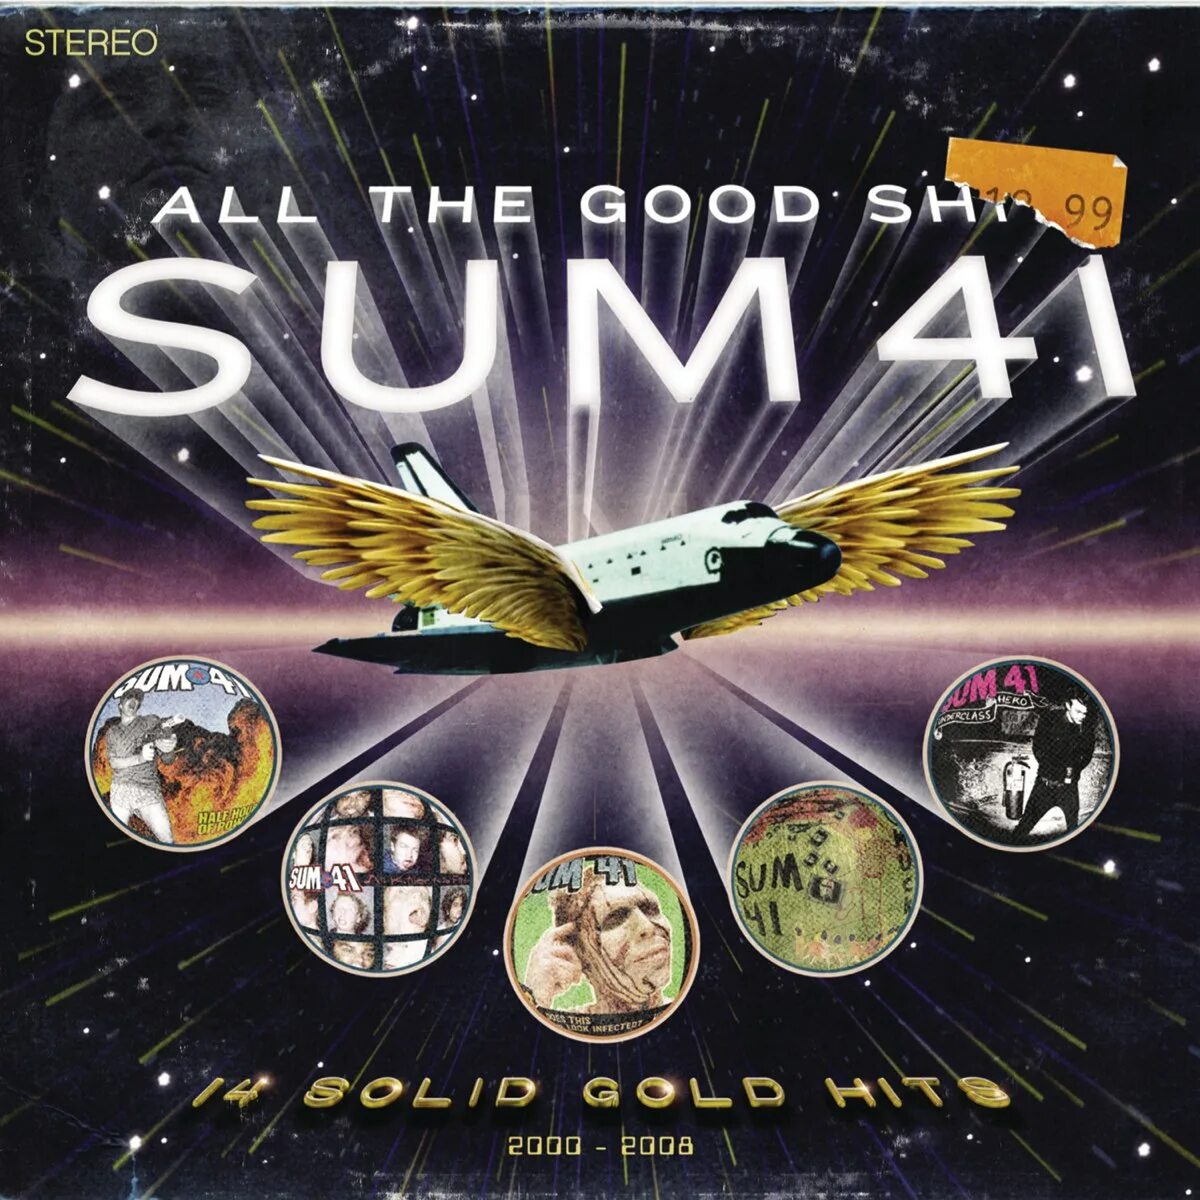 All the best different. All the good shit sum 41. Sum 41 обложки. Sum 41 альбомы. Sum 41 all the good.